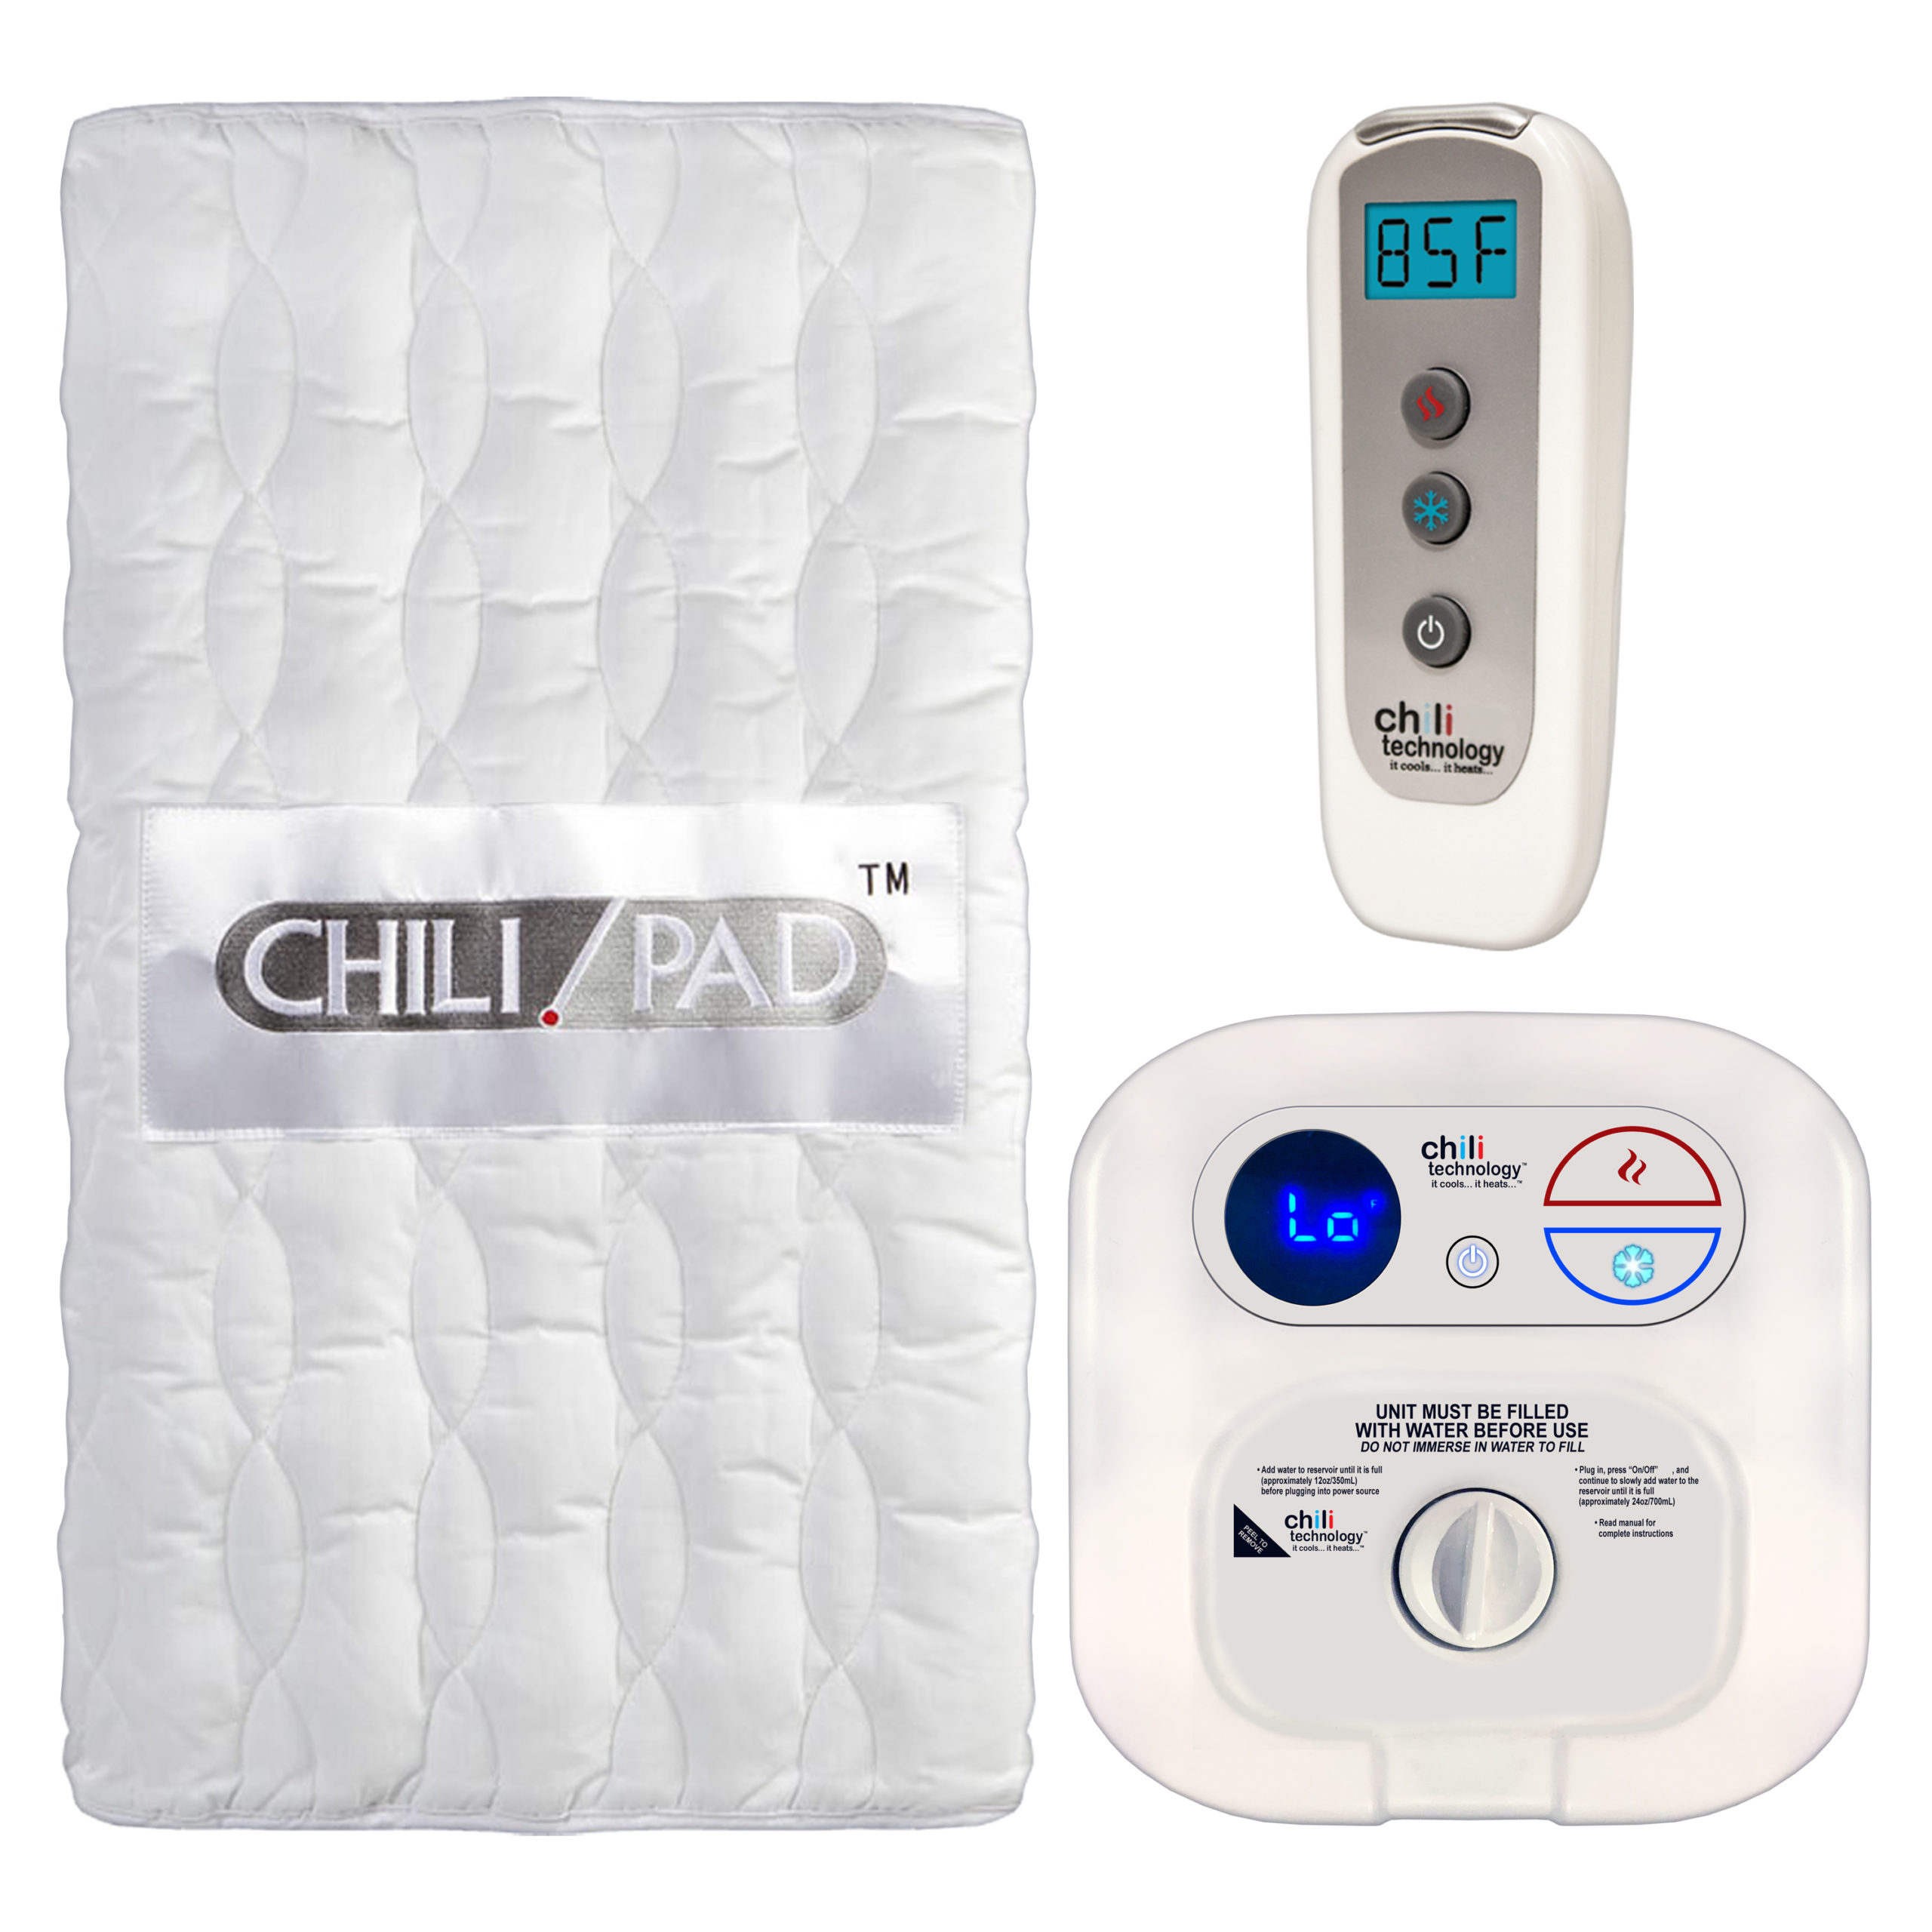 Sweating While Sleeping in Men - Chilipad|Temperature|Mattress|Cube|Sleep|Bed|Water|System|Pad|Ooler|Control|Unit|Night|Bedjet|Technology|Side|Air|Product|Review|Body|Time|Degrees|Noise|Price|Pod|Tubes|Heat|Device|Cooling|Room|King|App|Features|Size|Cover|Sleepers|Sheets|Energy|Warranty|Quality|Mattress Pad|Control Unit|Cube Sleep System|Sleep Pod|Distilled Water|Remote Control|Sleep System|Desired Temperature|Water Tank|Chilipad Cube|Chili Technology|Deep Sleep|Pro Cover|Ooler Sleep System|Hydrogen Peroxide|Cool Mesh|Sleep Temperature|Fitted Sheet|Pod Pro|Sleep Quality|Smartphone App|Sleep Systems|Chilipad Sleep System|New Mattress|Sleep Trial|Full Refund|Mattress Topper|Body Heat|Air Flow|Chilipad Review